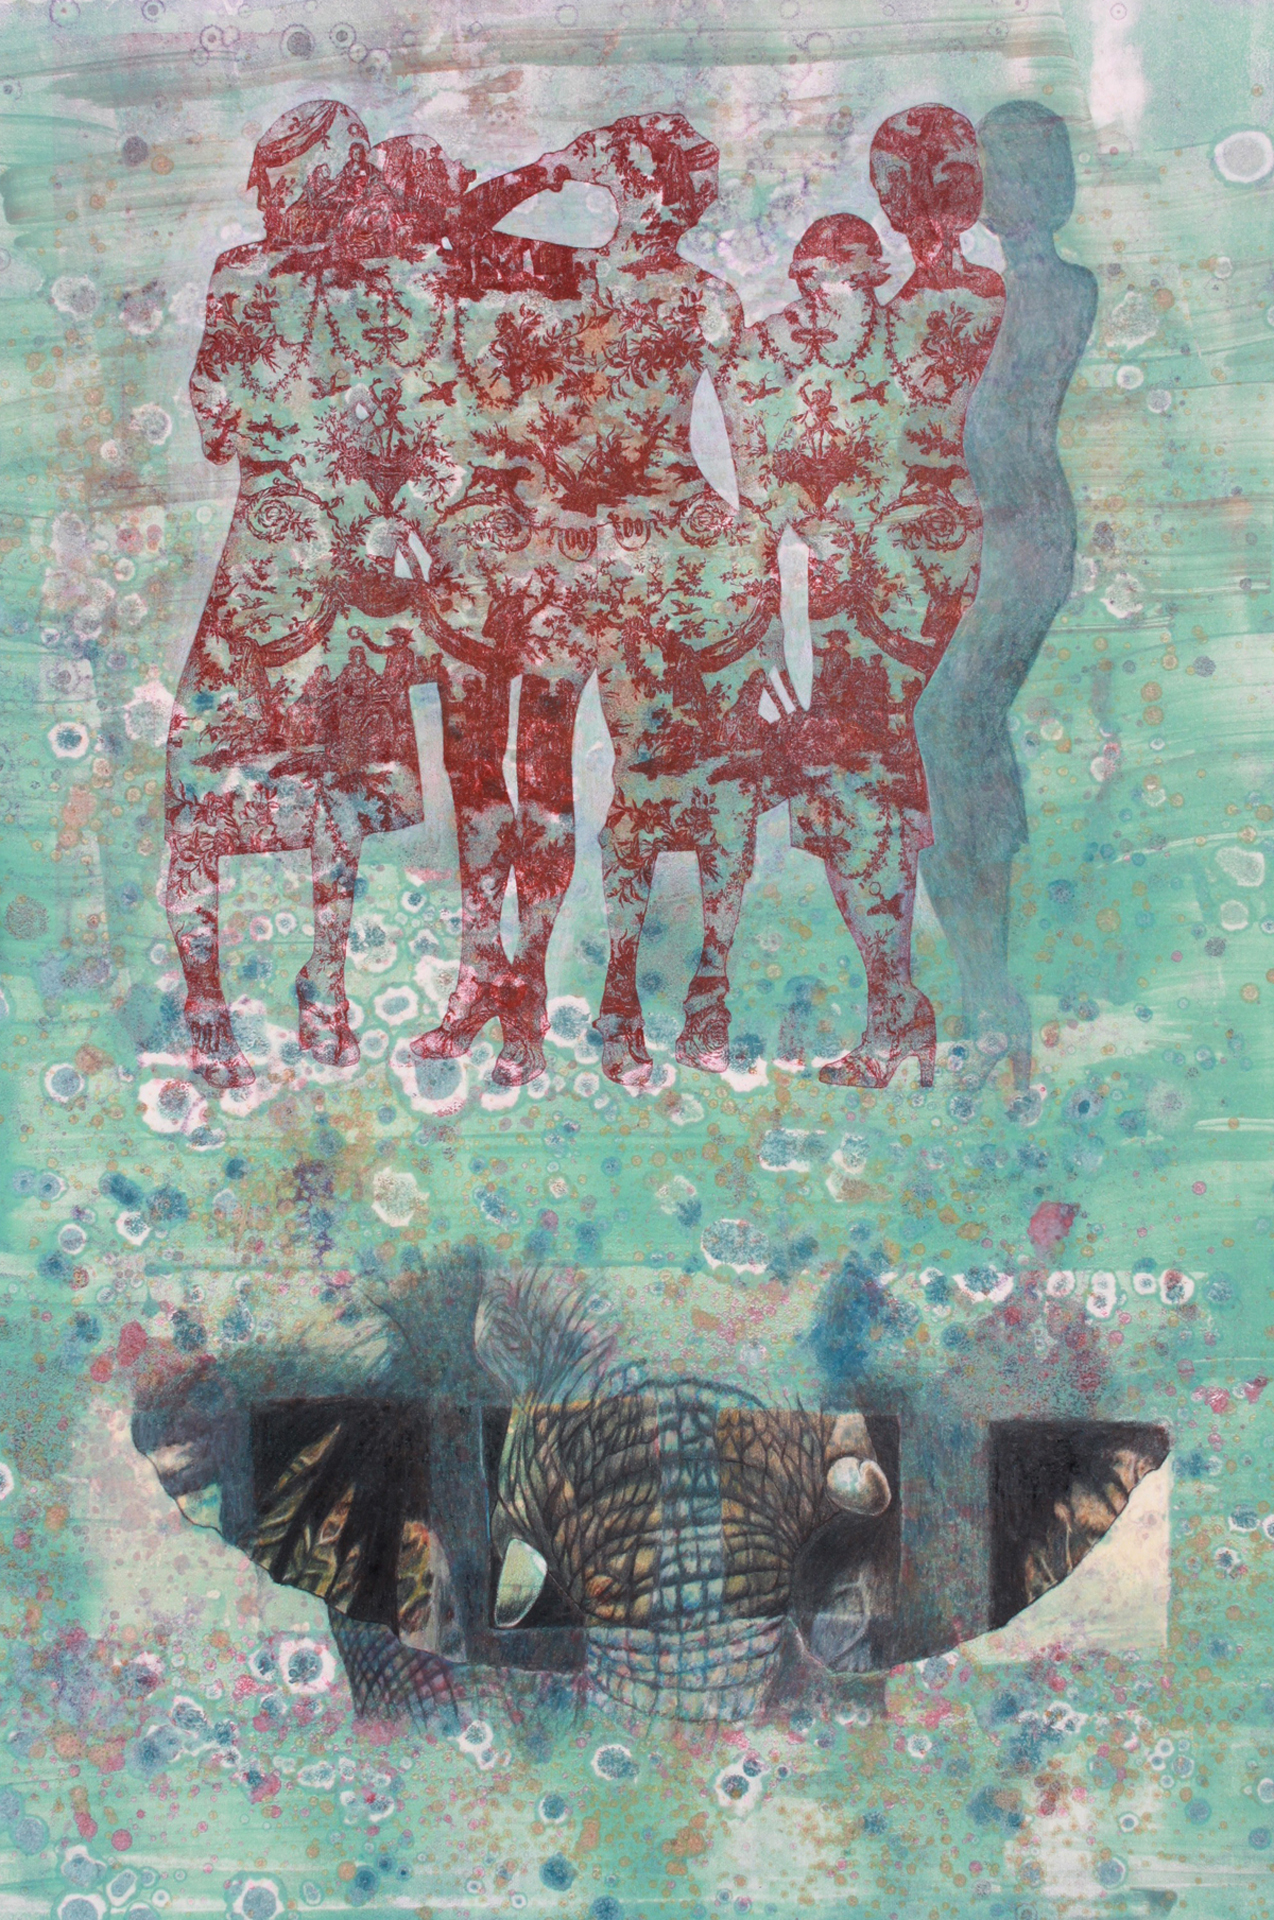 Figures filled with an intricate red pattern stand over a drawing of the head of an African elephant, seeming to emerge from windows in the textured middle ground